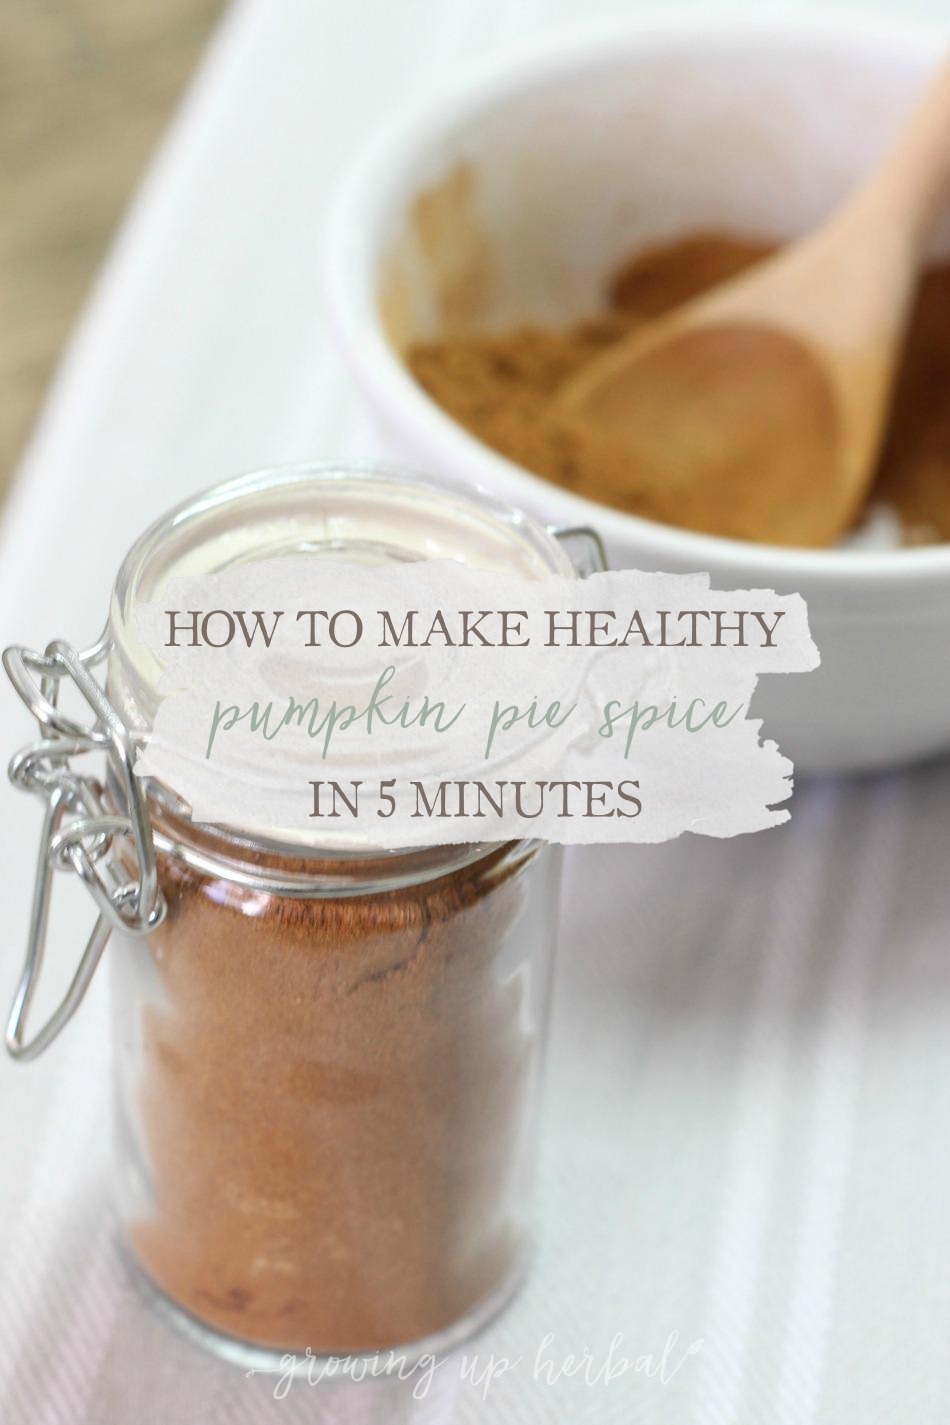 How To Make Healthy Pumpkin Pie Spice In 5 Minutes | Growing Up Herbal | Pumpkin pie spice makes fall pumpkin recipes even better. Learn how to make it quickly and healthily here!